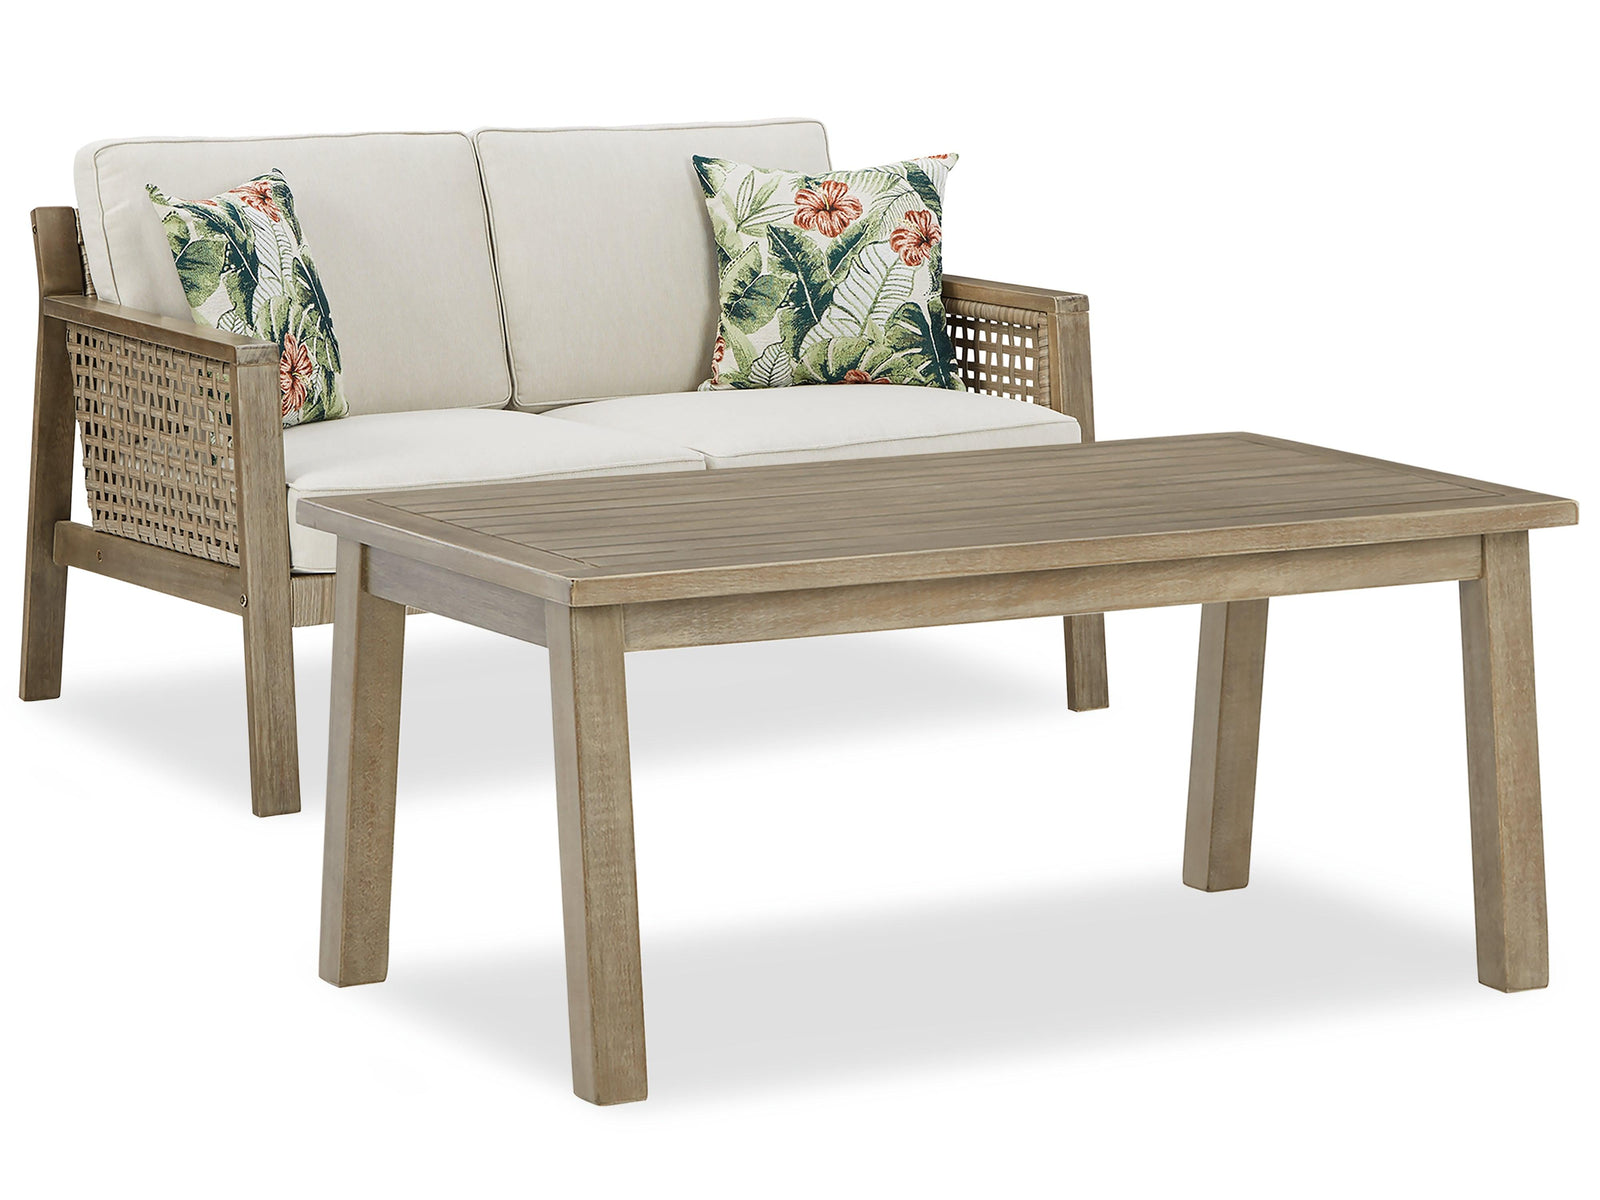 Barn Brown Cove Outdoor Loveseat With Coffee Table - Ella Furniture